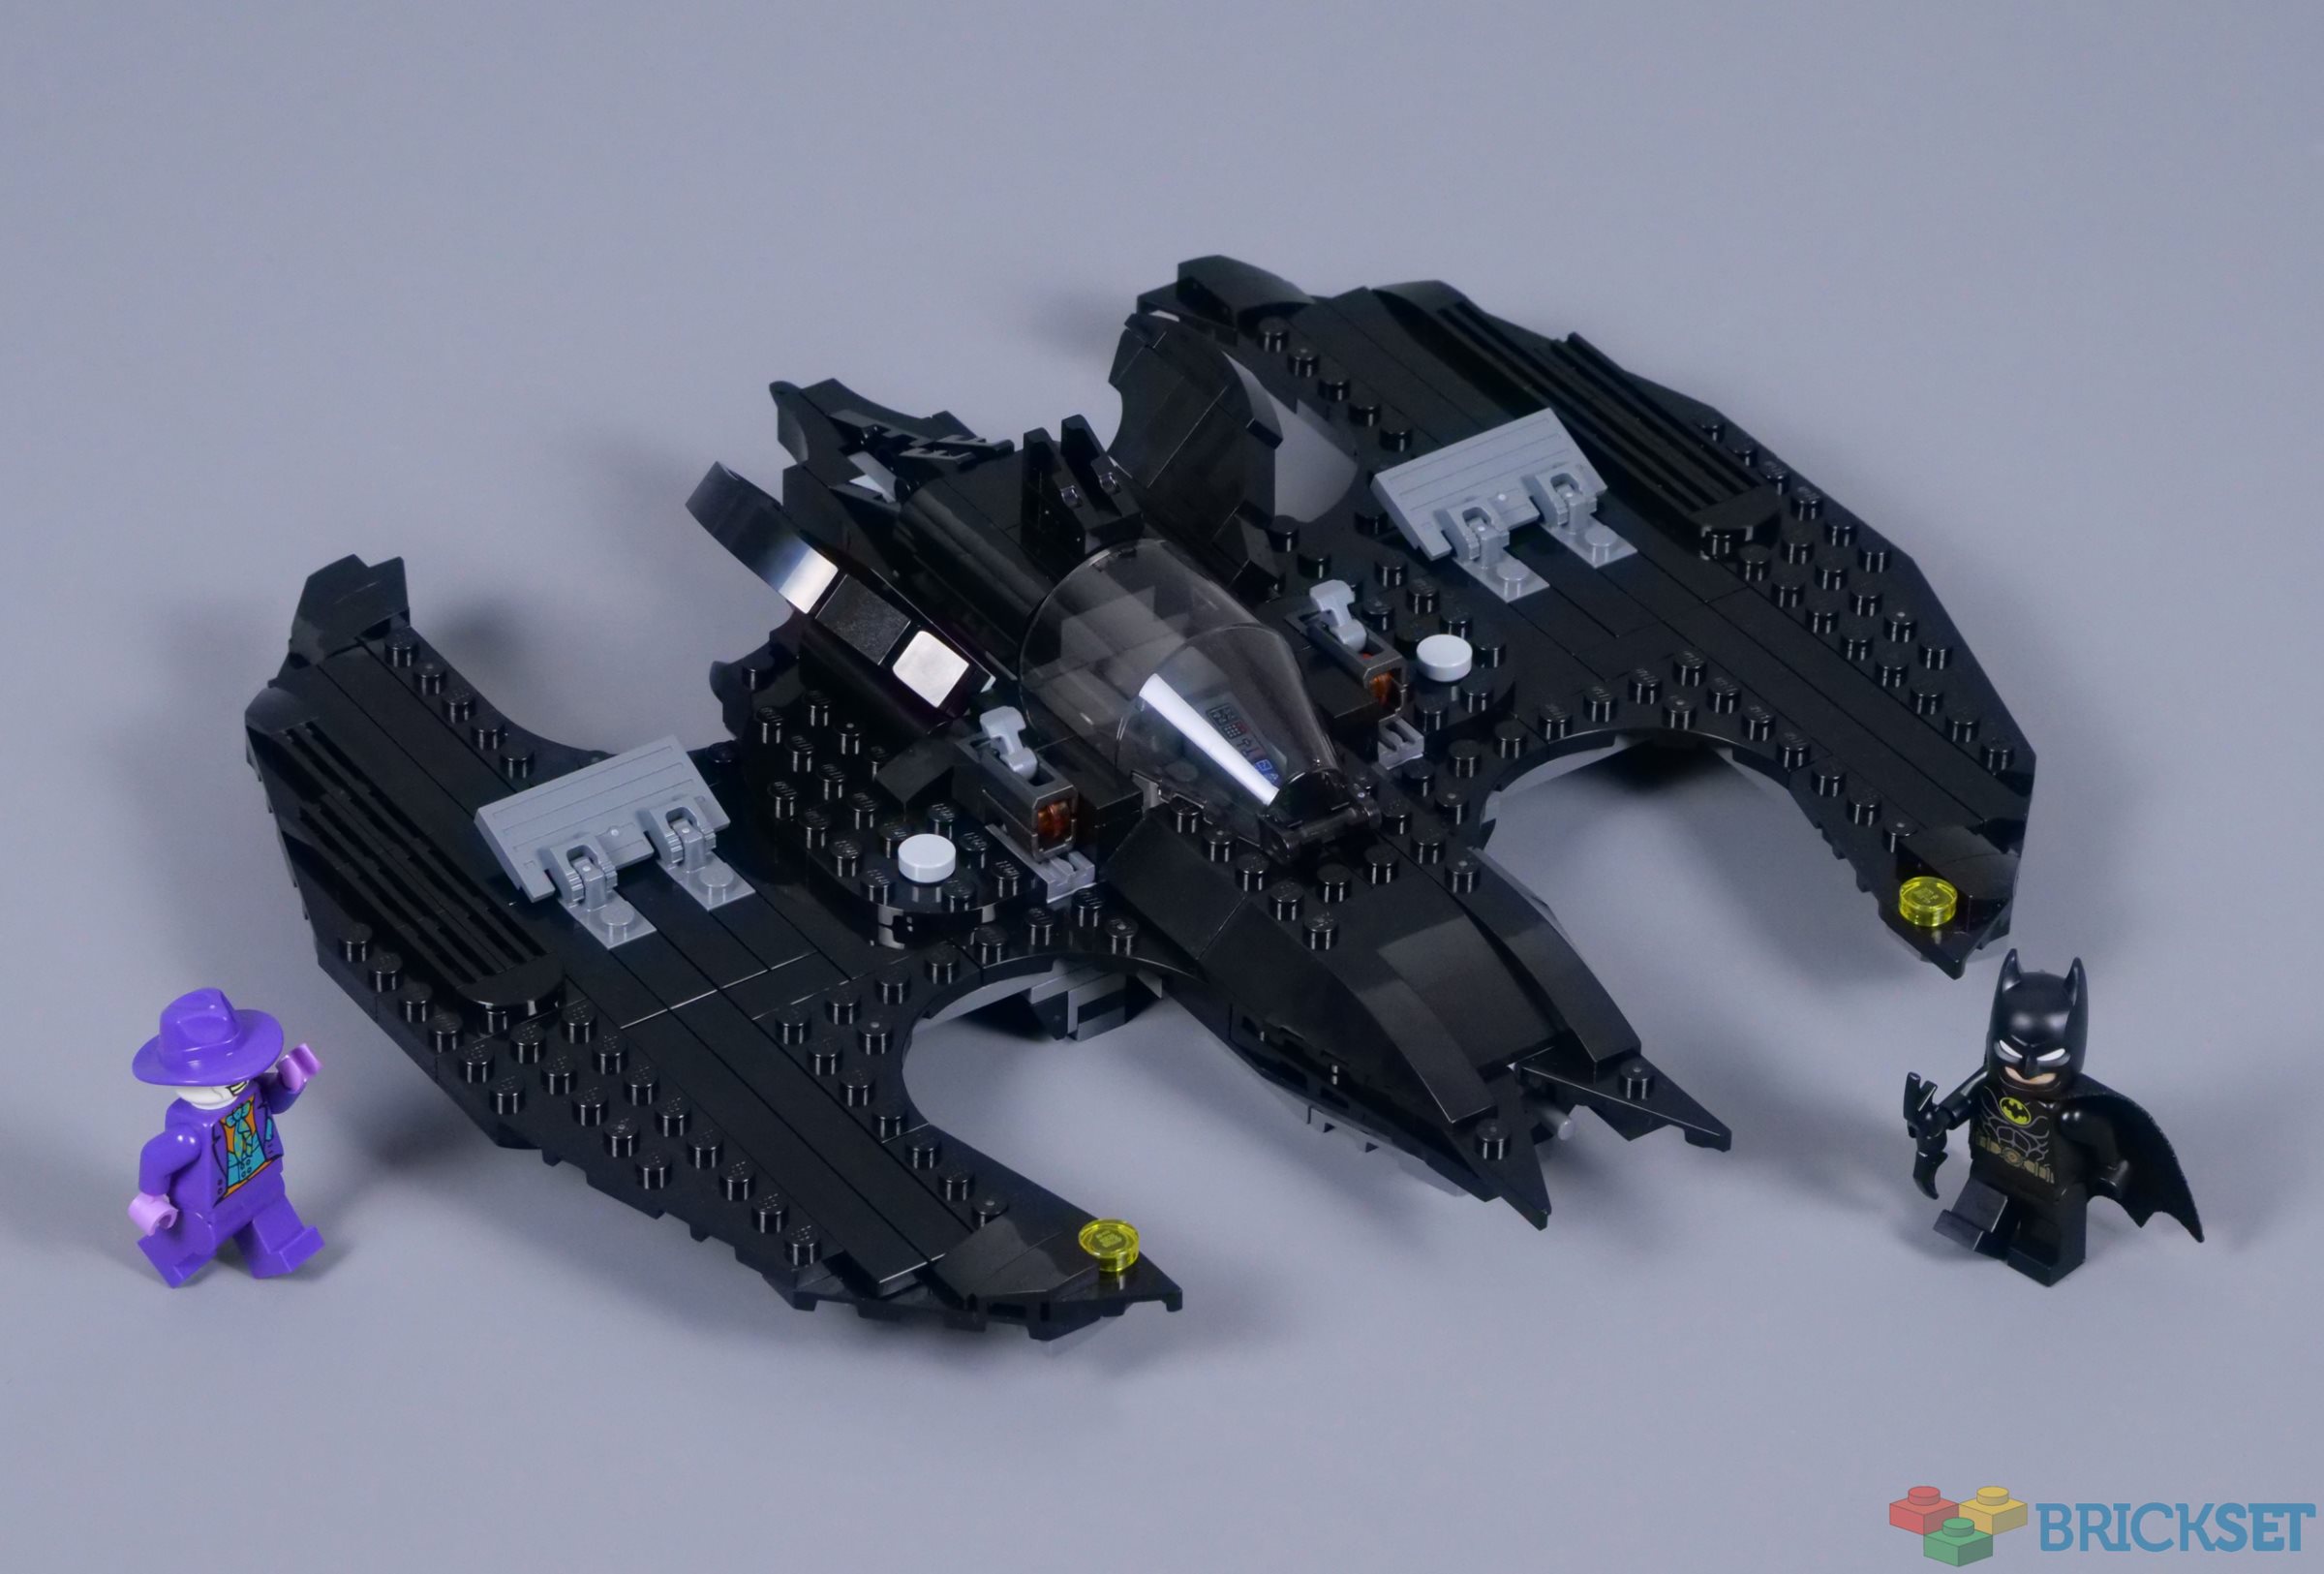 LEGO 1989 Batwing 76265 Set Review What are your thoughts on this $38